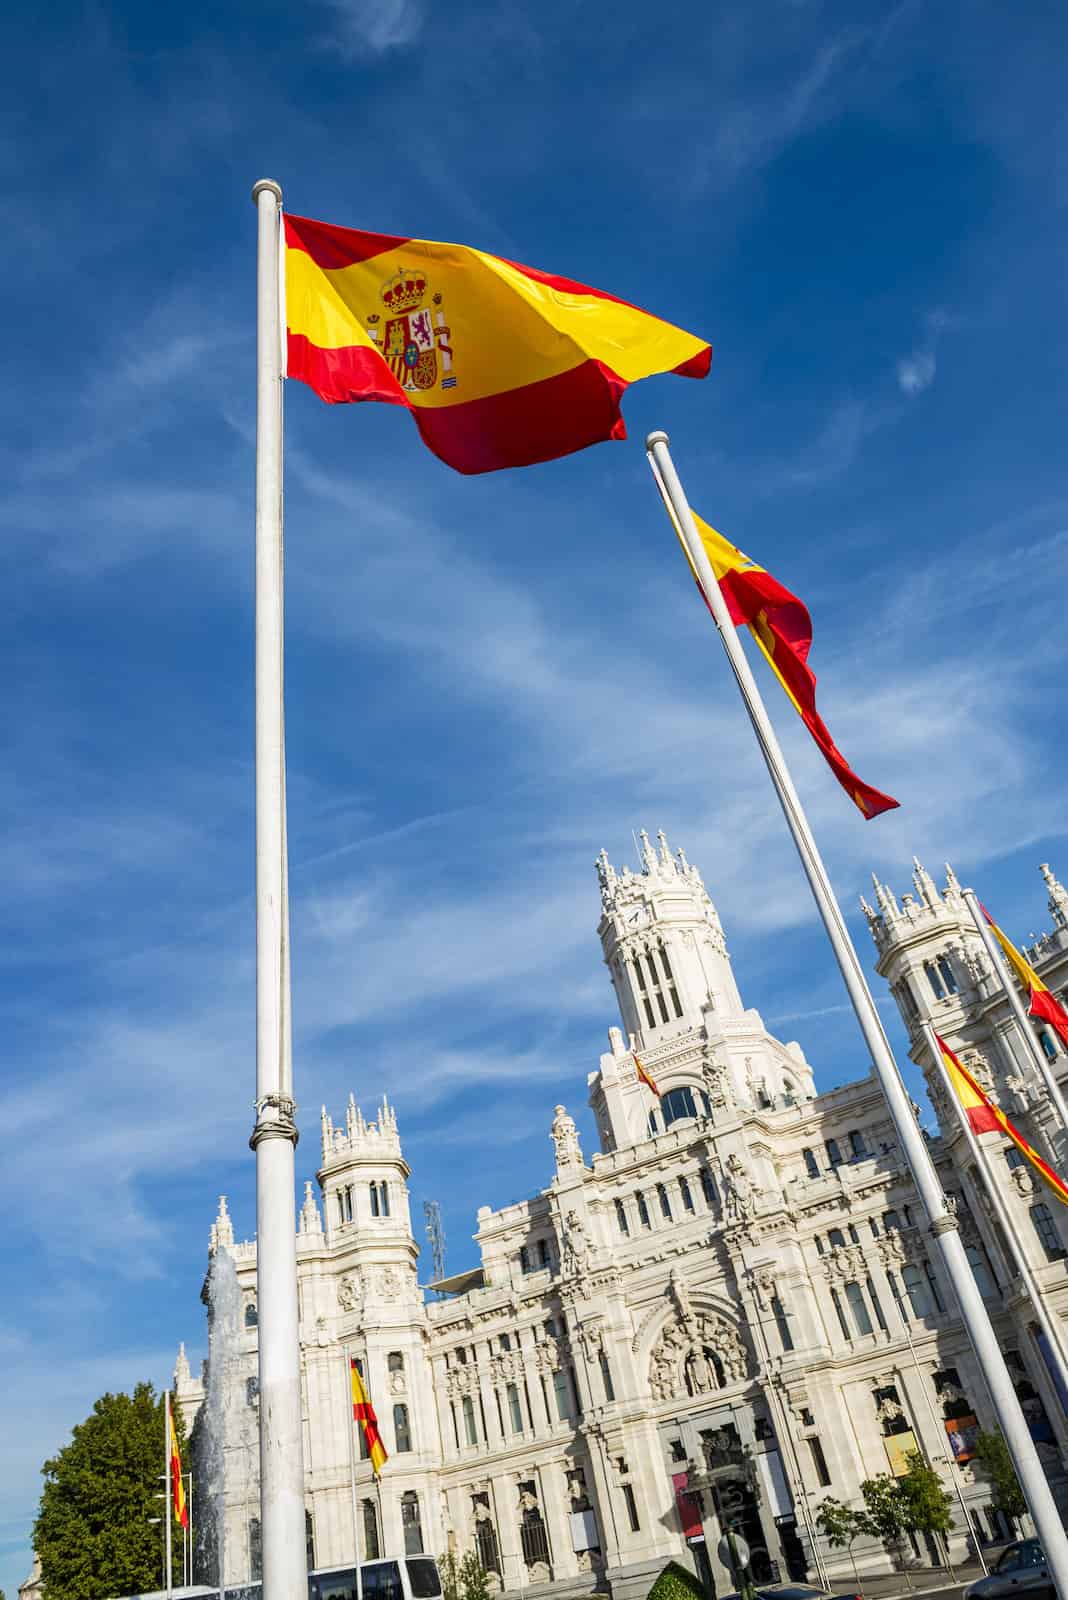 Cibeles Palace located downtown Madrid